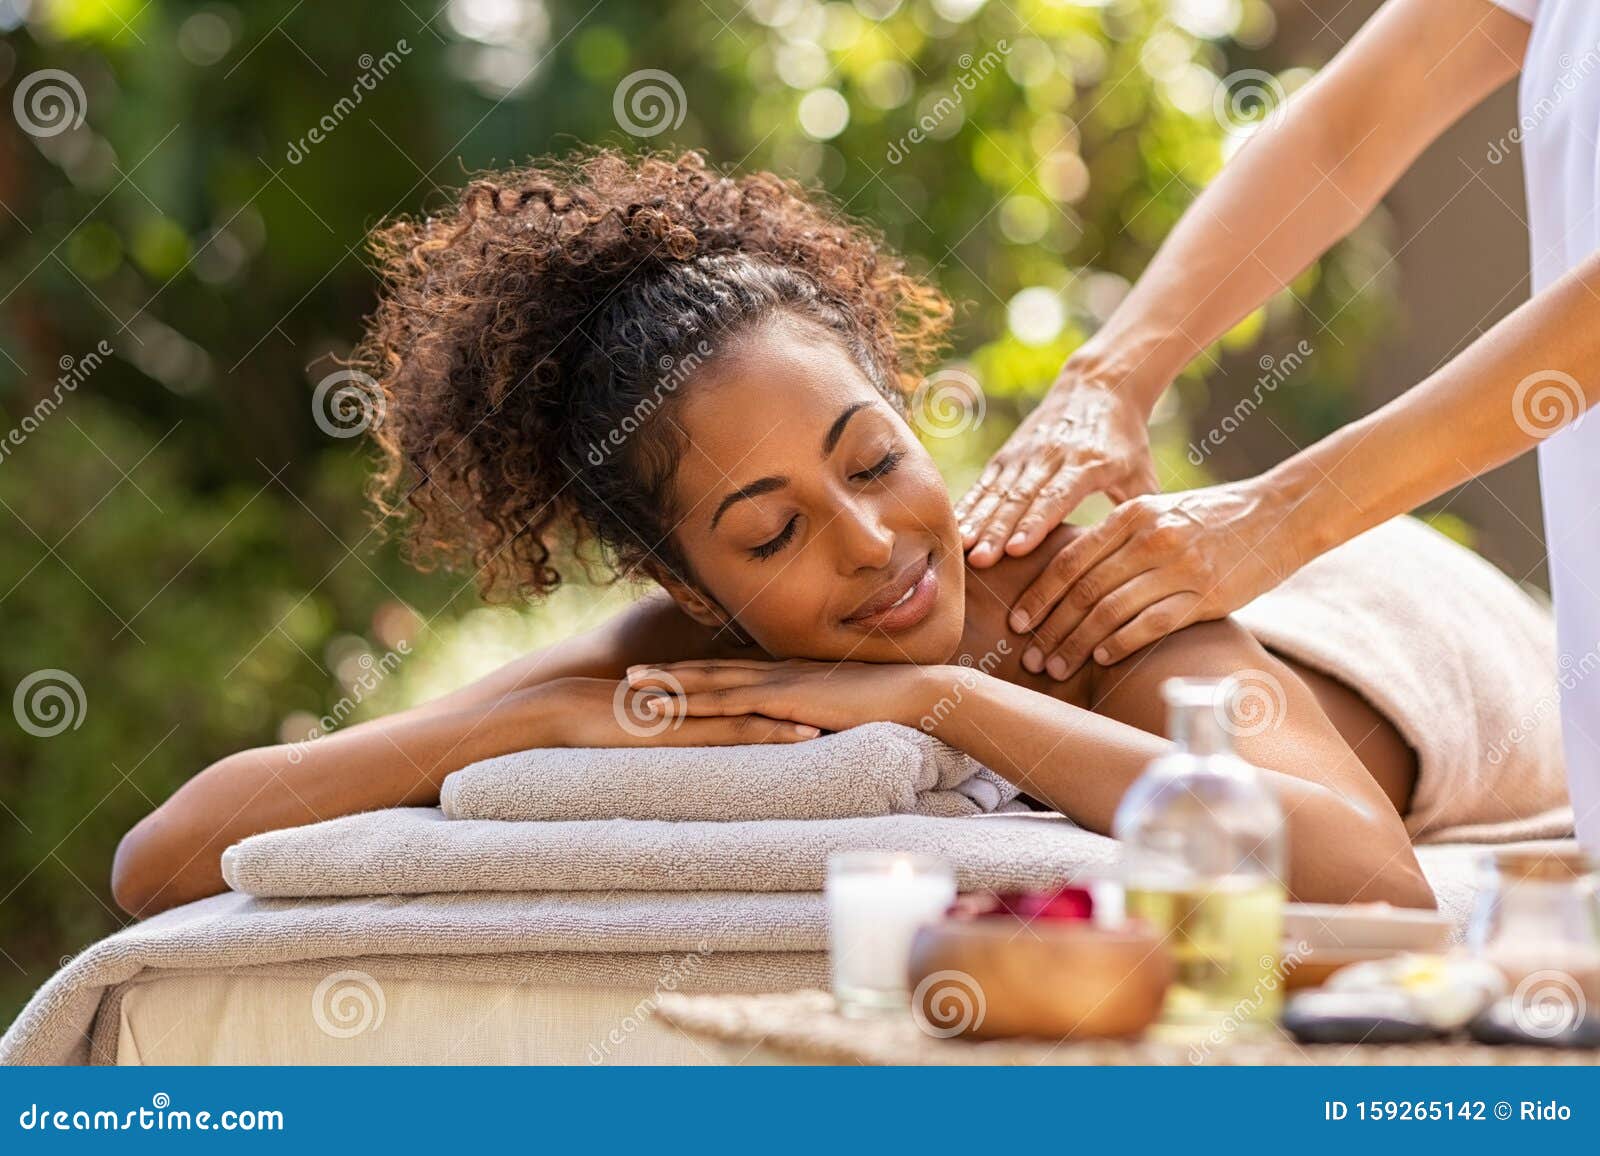 Beautiful Woman Relaxing With Back Massage Stock Photo Image Of